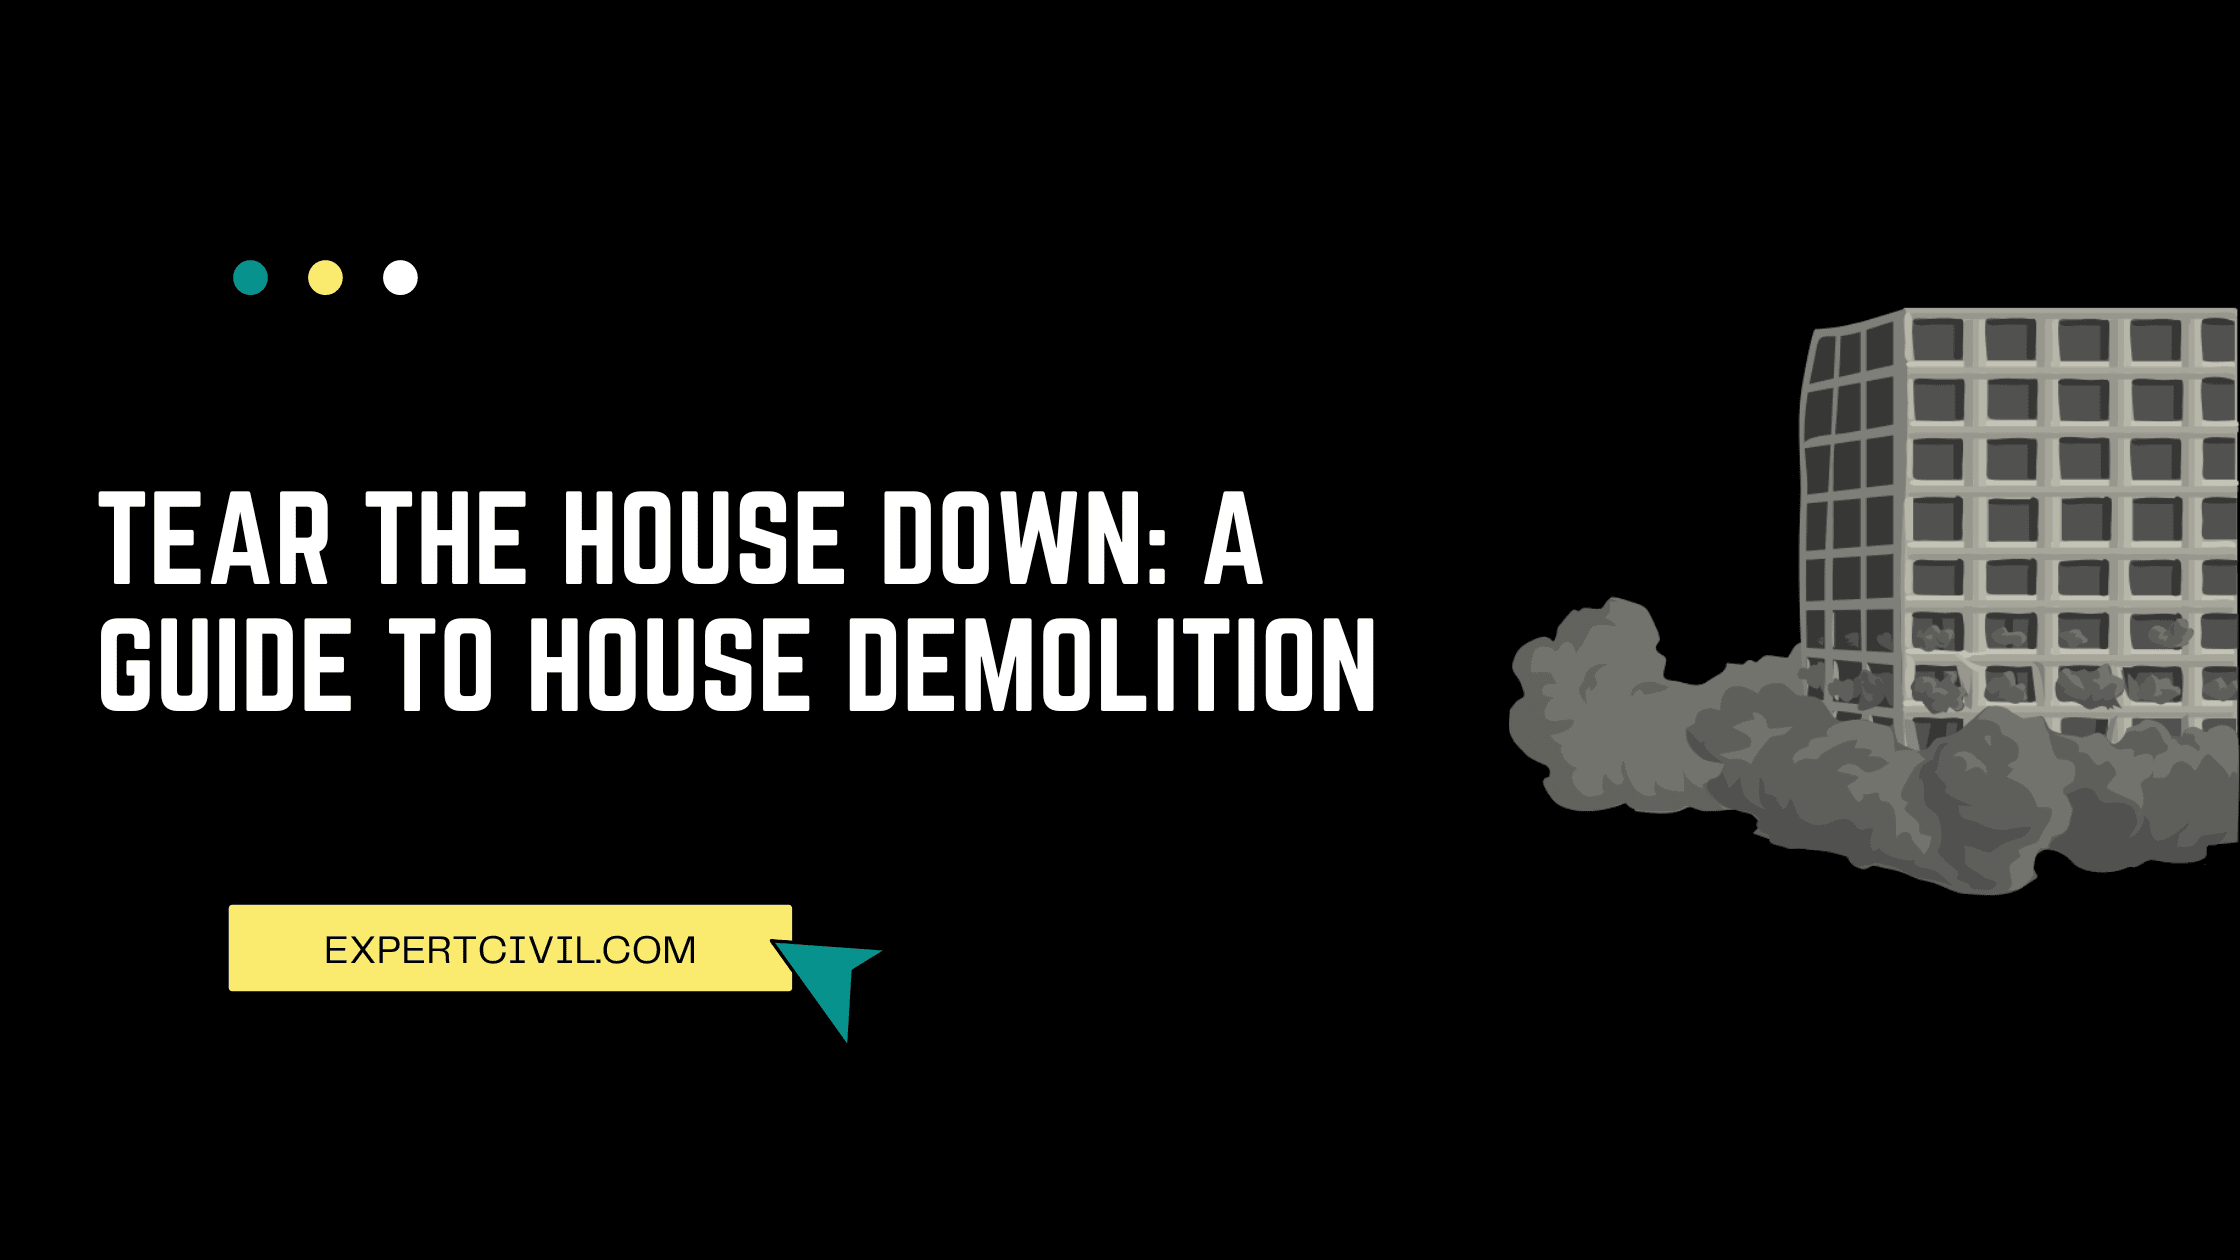 Tear the House Down: A Guide to House Demolition